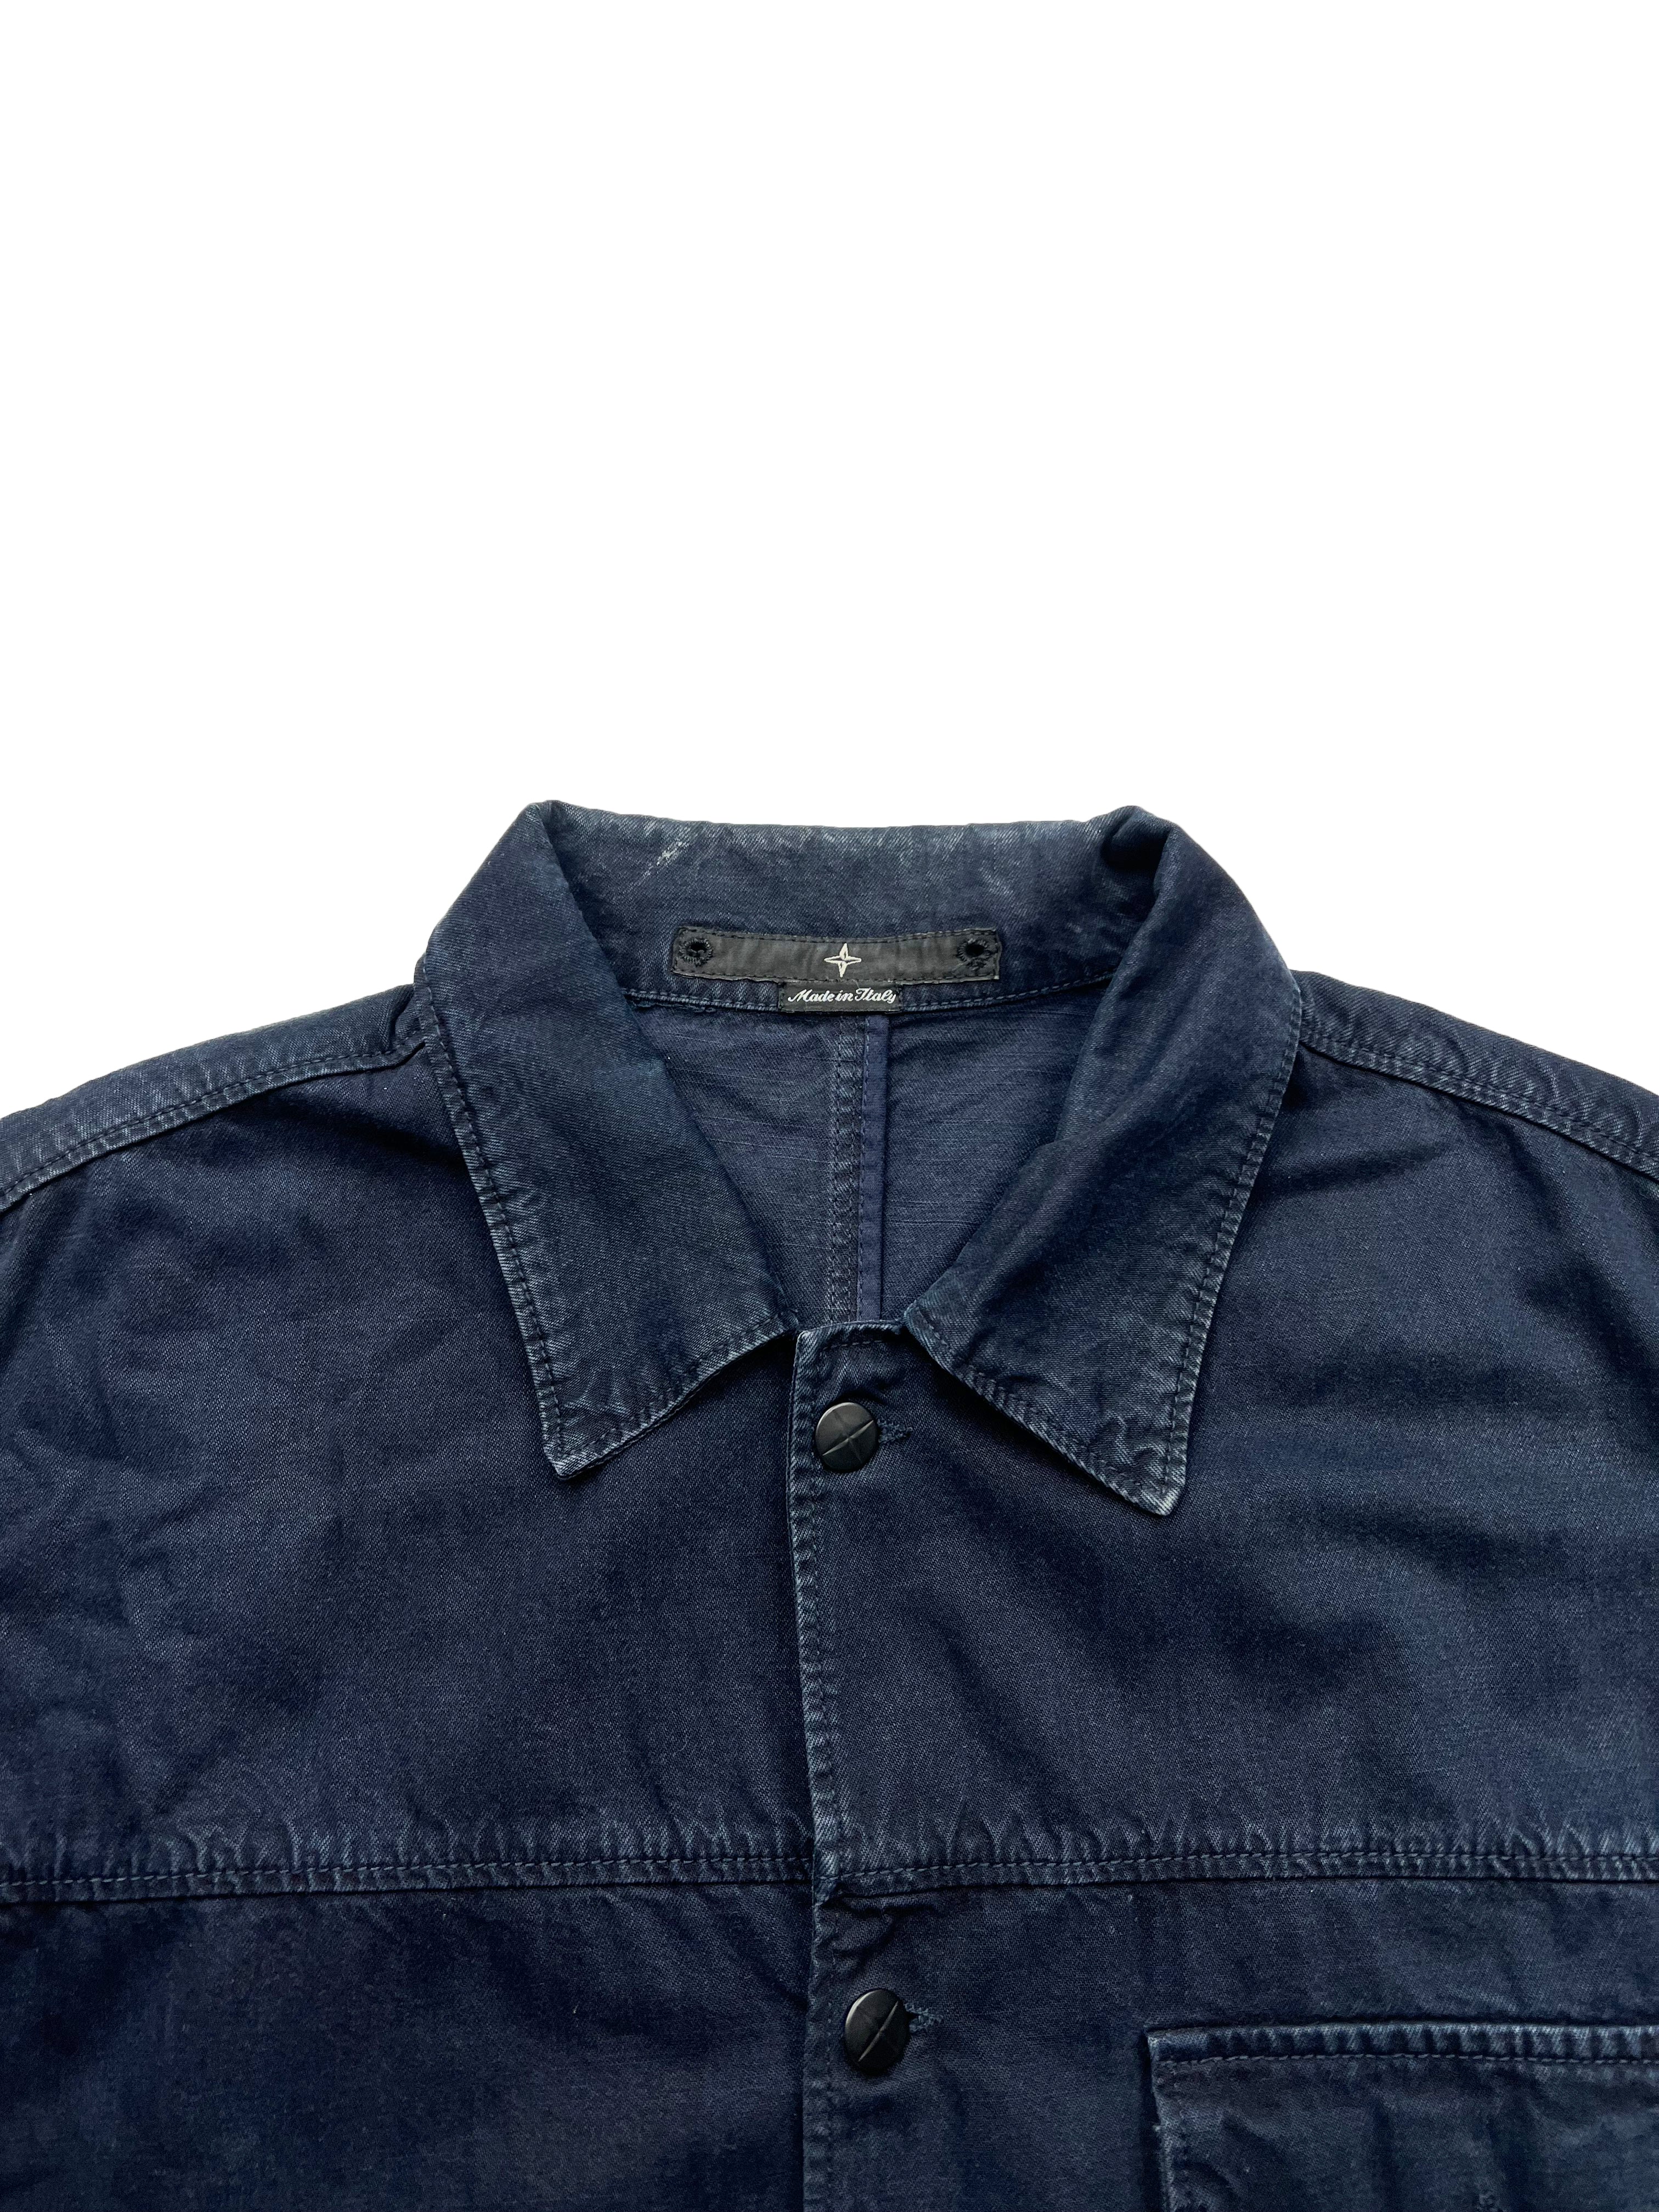 Stone island Denims Spell Out Jacket 2001